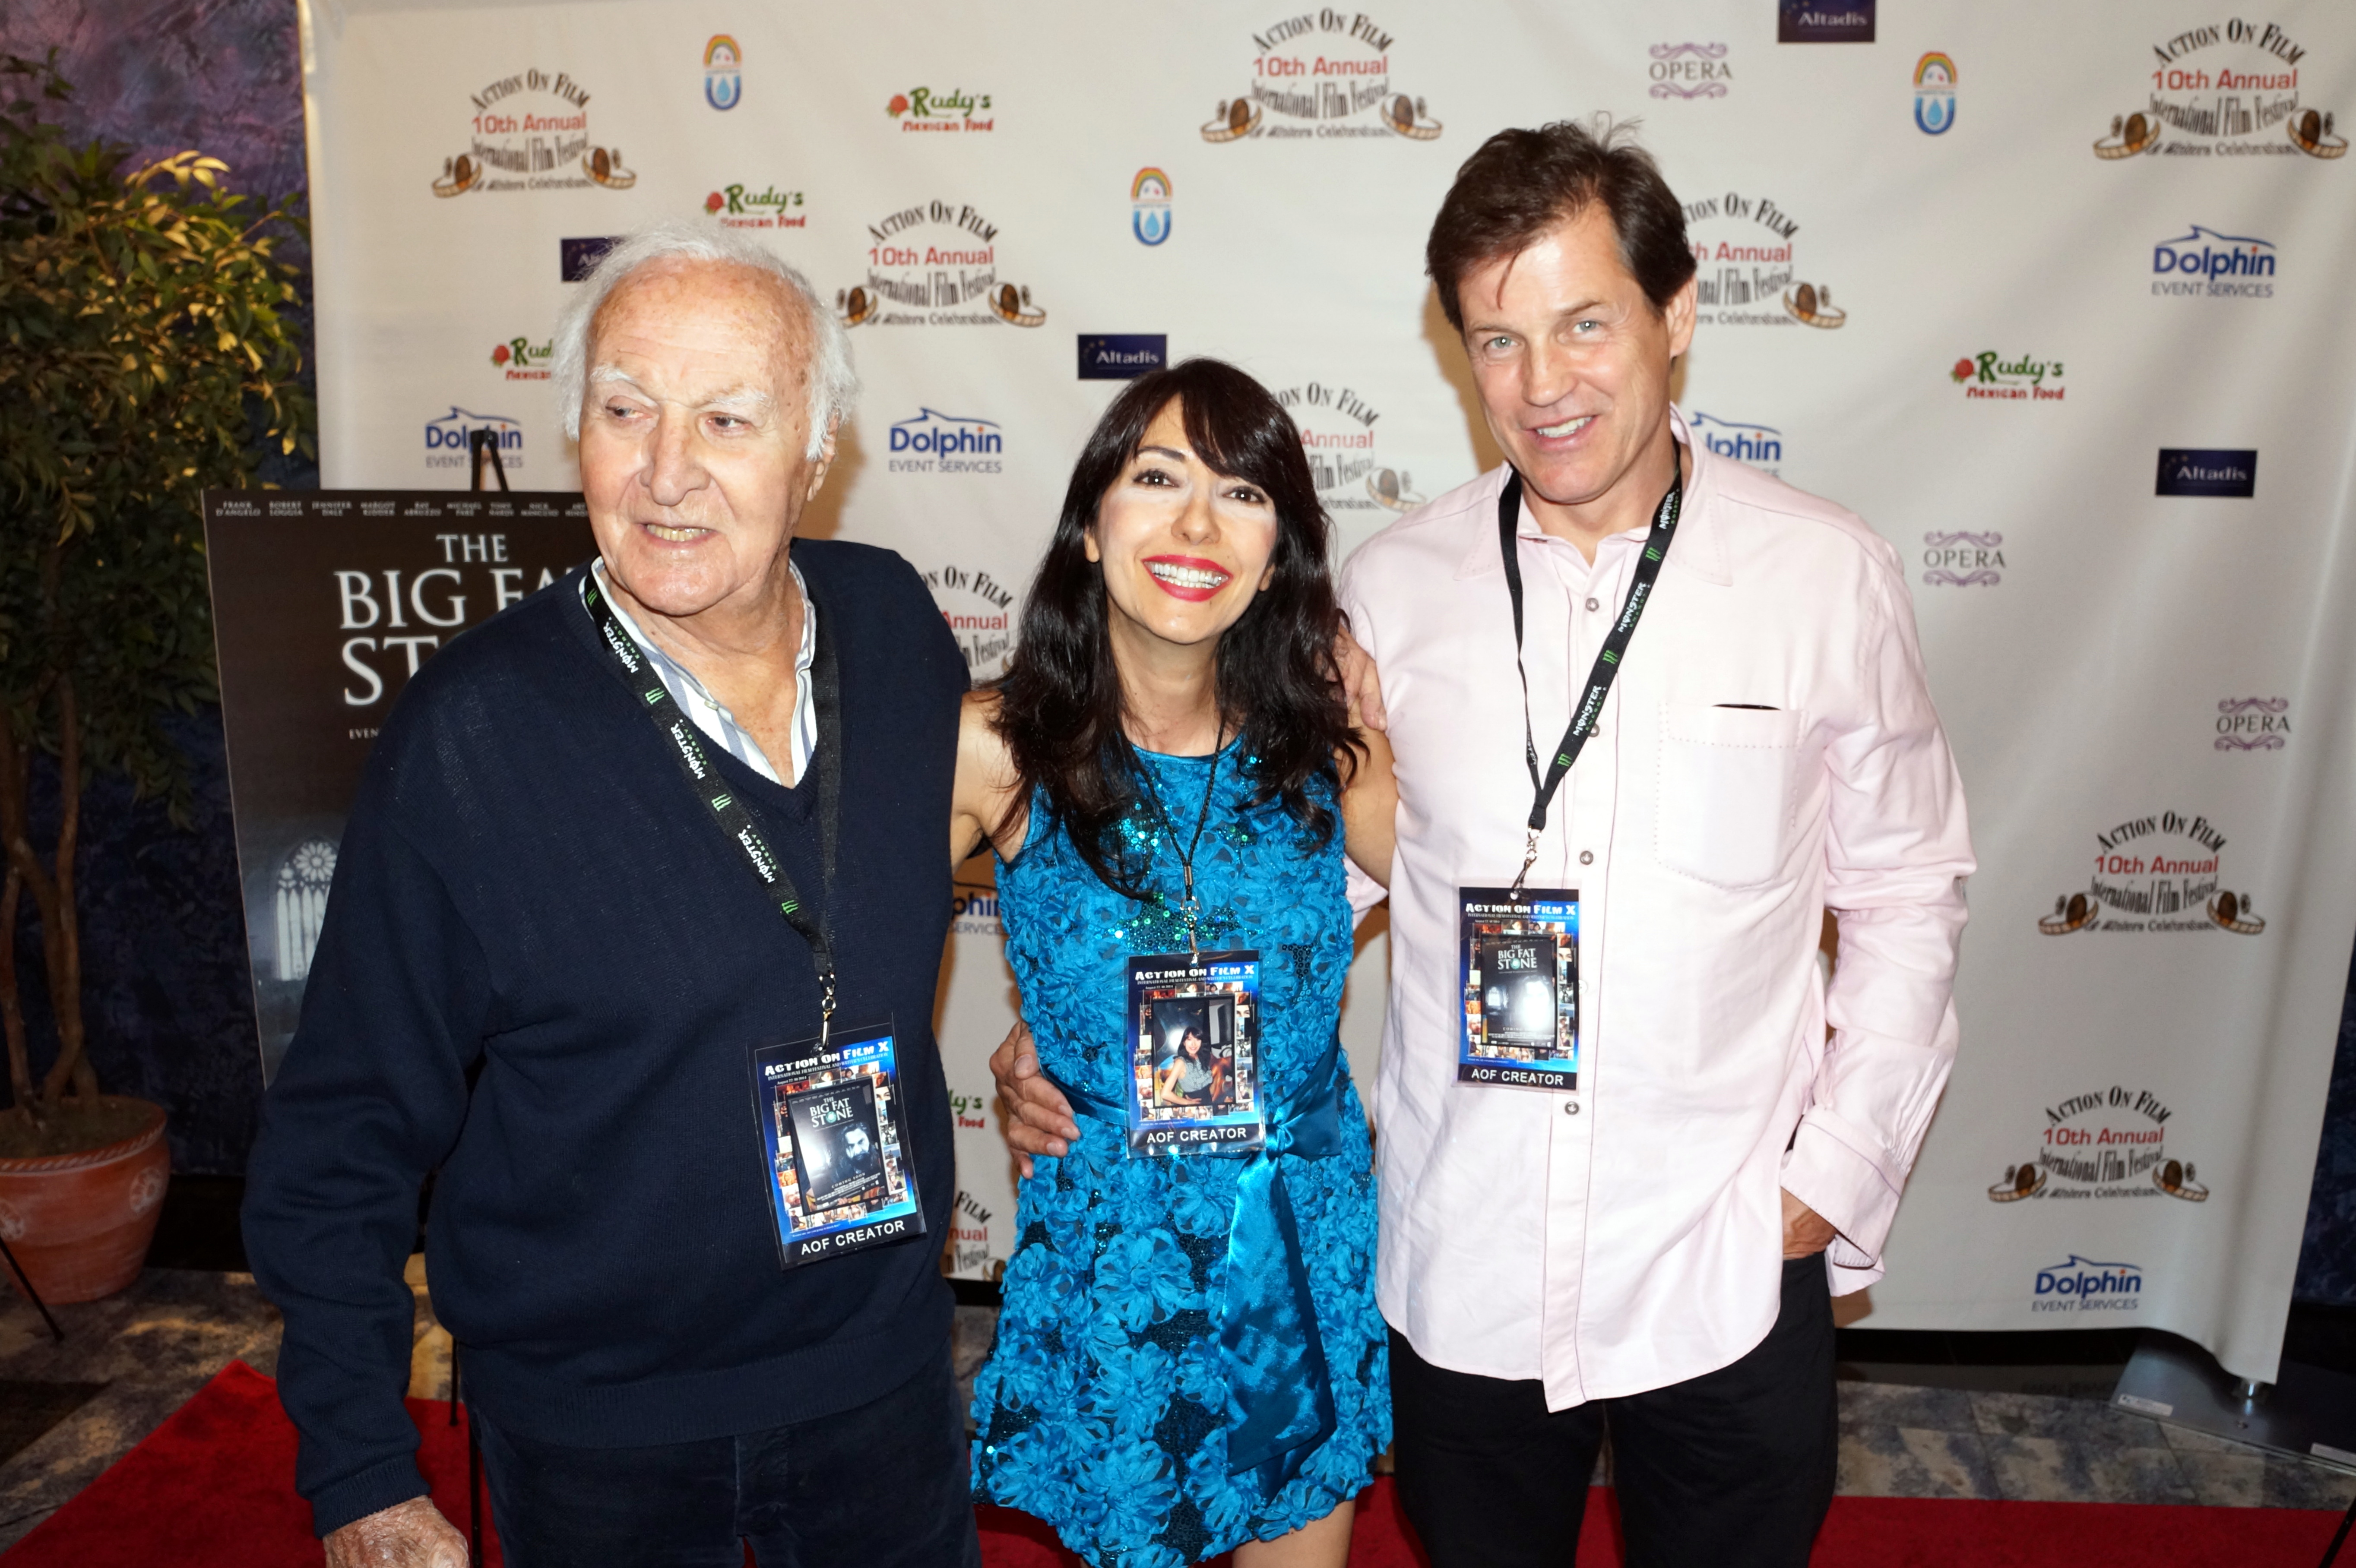 Luciana Lagana, Michael Paré, and Robert Loggia at the screening of the feature film Big Fat Stone at the Action on Film International Film Festival on 8/25/14